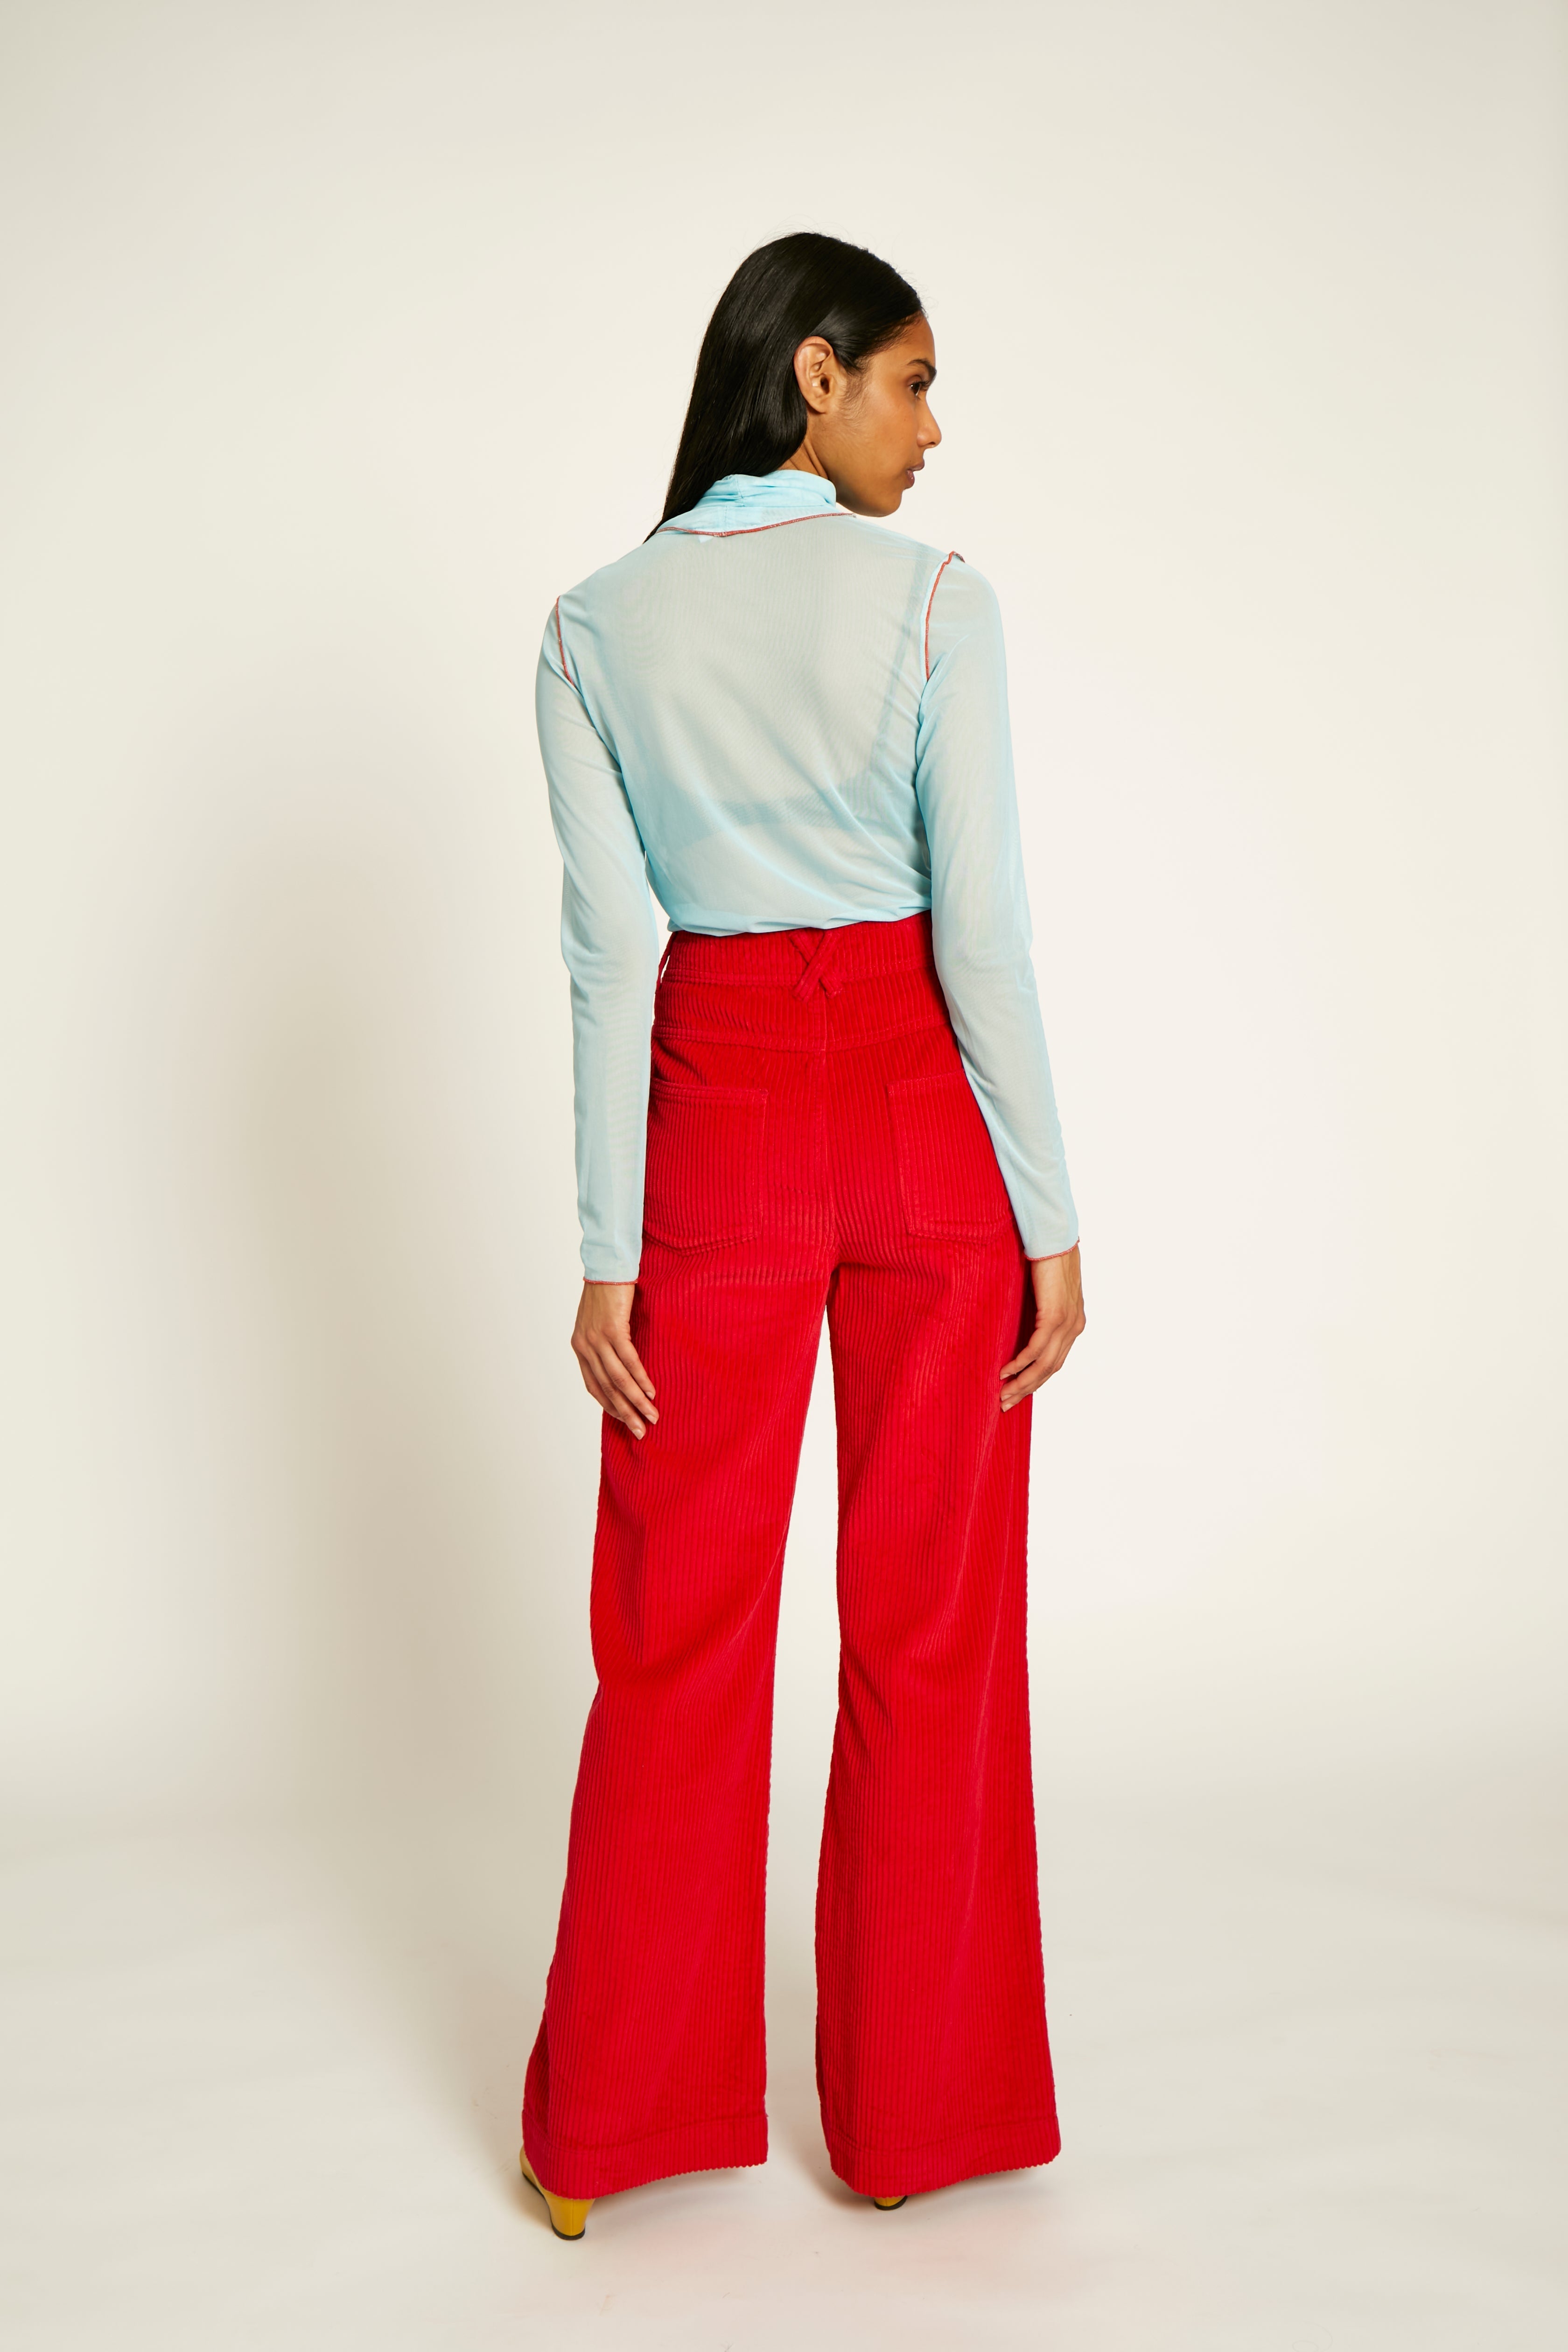 Red High Waist Fitted Palazzo Pants | Red trousers outfit, Classy outfits,  Red and black outfits